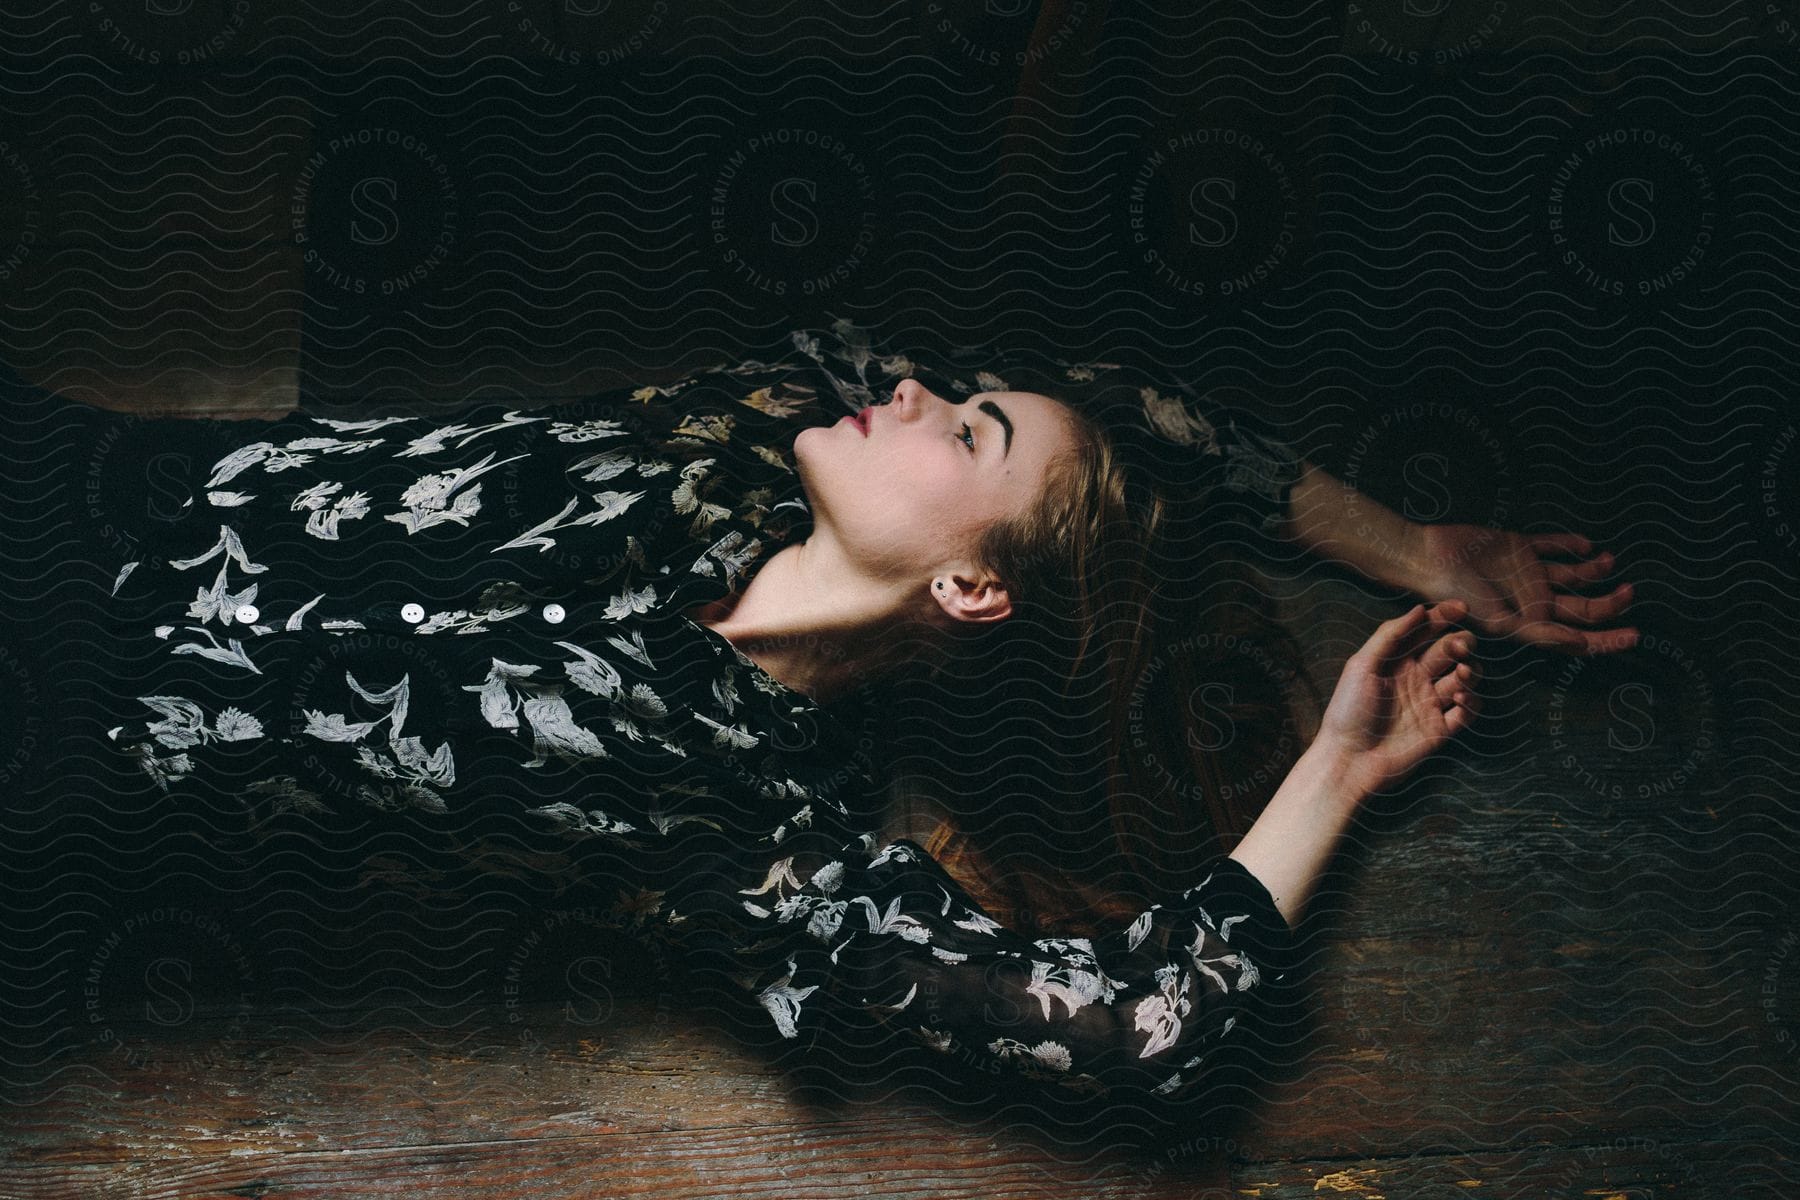 A woman laying down on a wooden floor with her eyes closed and arms raised above her head